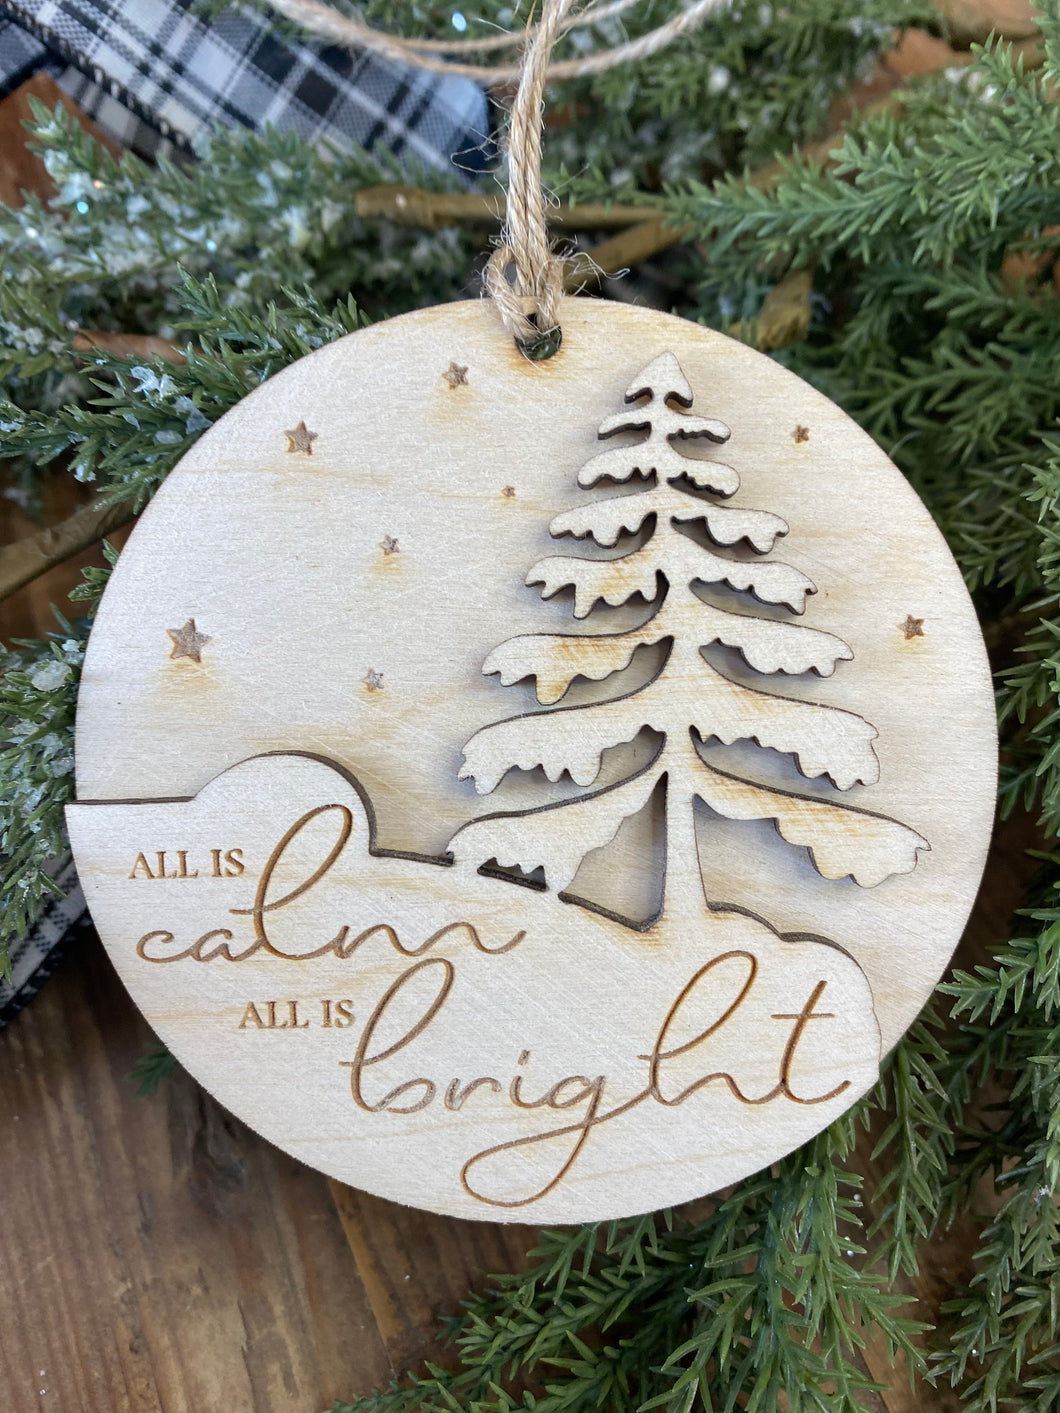 All is calm wood ornament